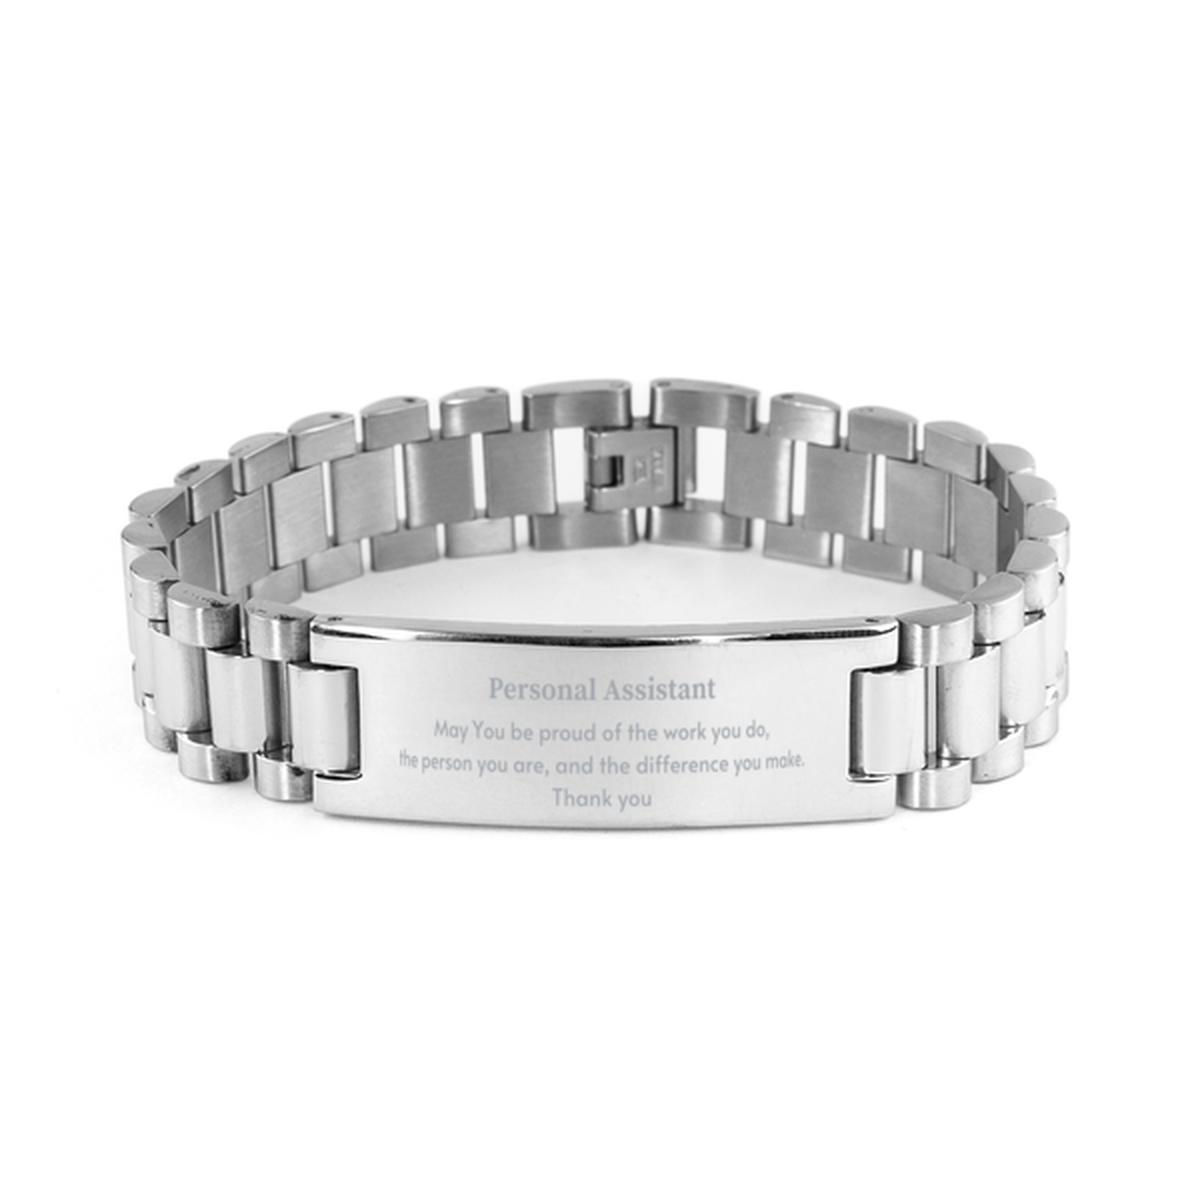 Heartwarming Ladder Stainless Steel Bracelet Retirement Coworkers Gifts for Personal Assistant, Personal Assistant May You be proud of the work you do, the person you are Gifts for Boss Men Women Friends